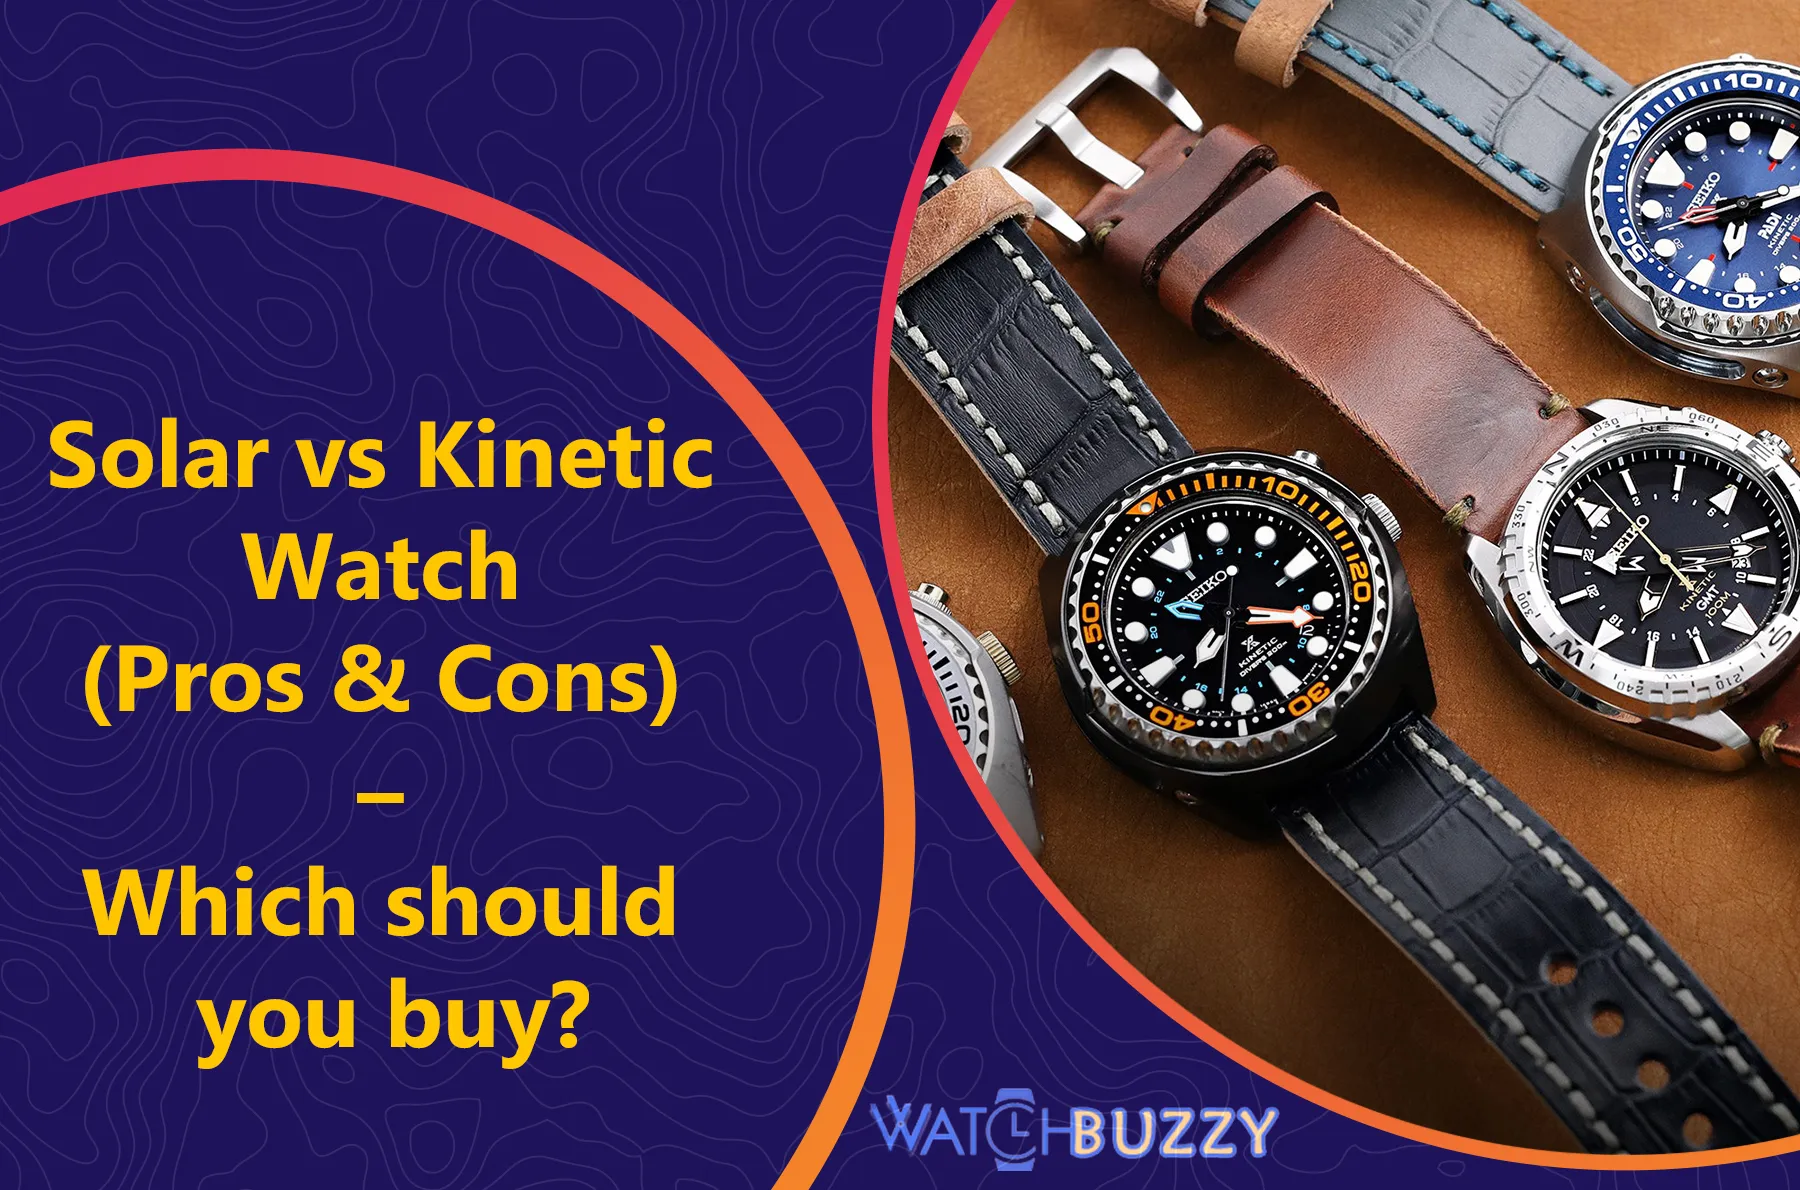 Solar vs Kinetic Watch (Pros & Cons) – Which should you buy?